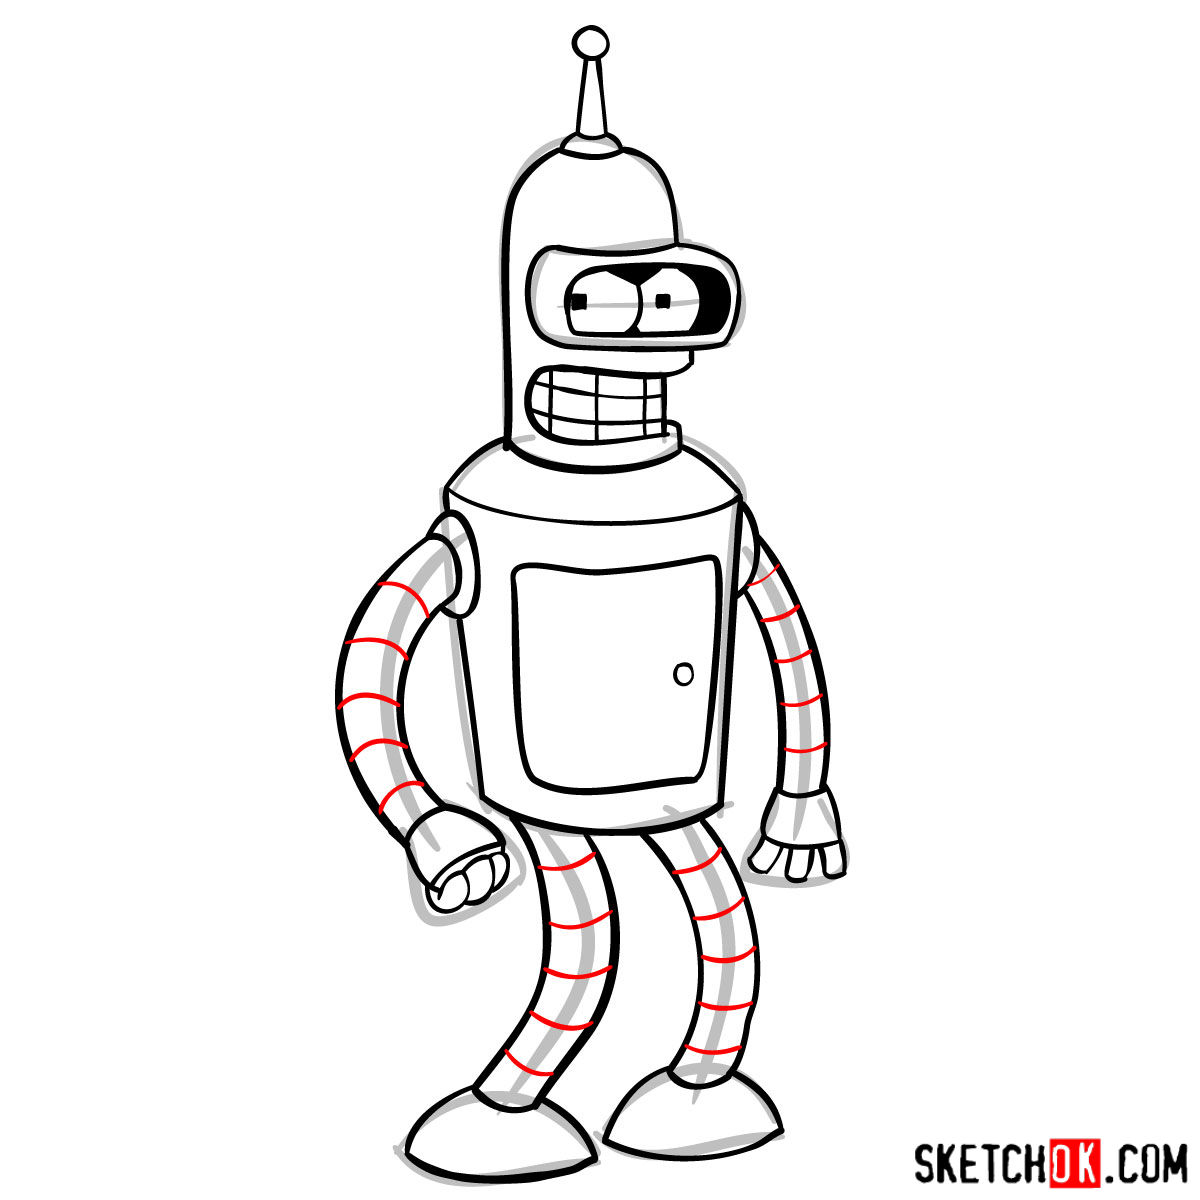 How to draw Bender Rodríguez - step 10